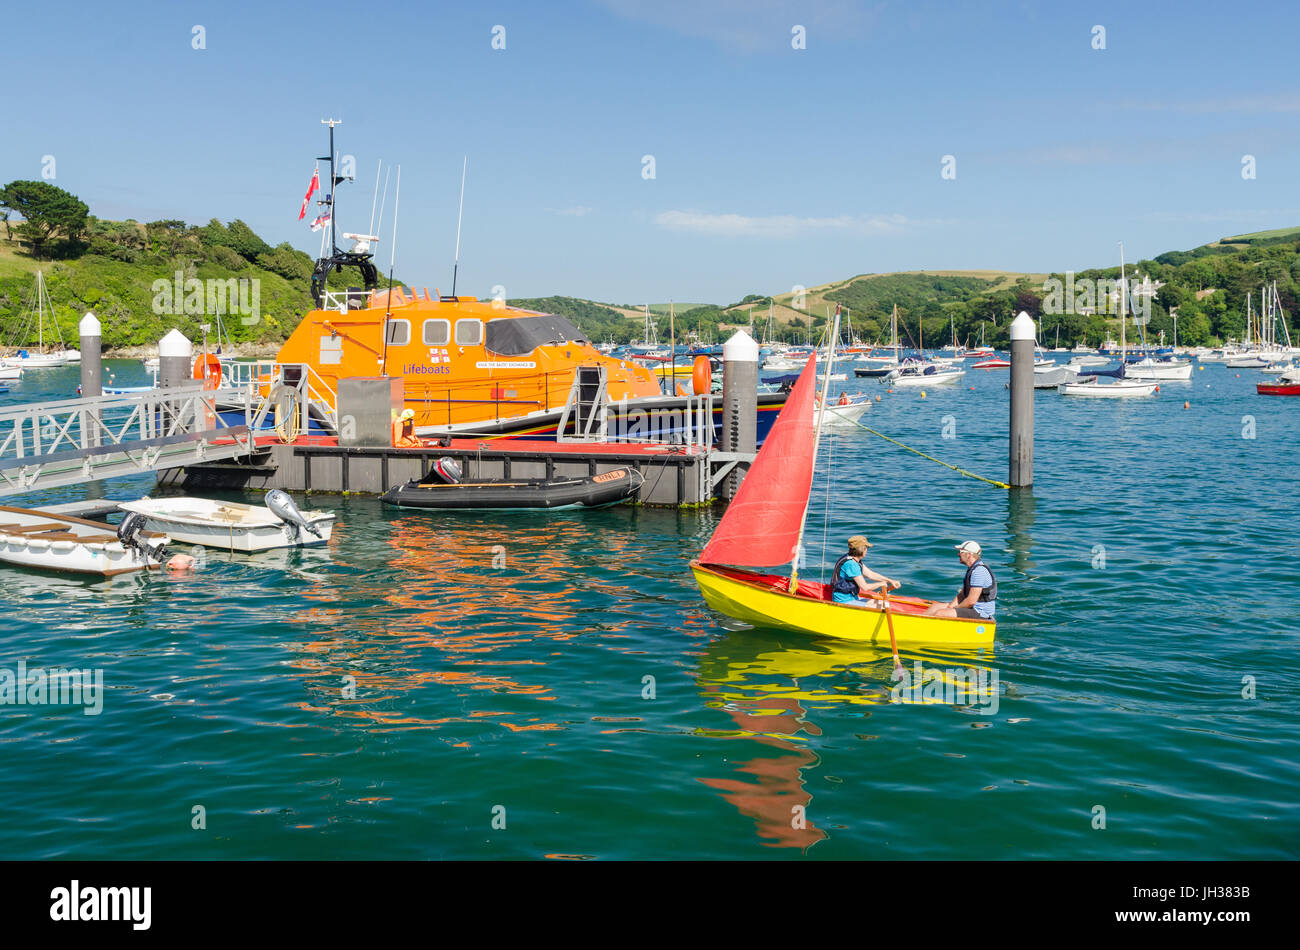 Brightly coloured sailing dinghy in the water in the Salcombe estuary Stock Photo